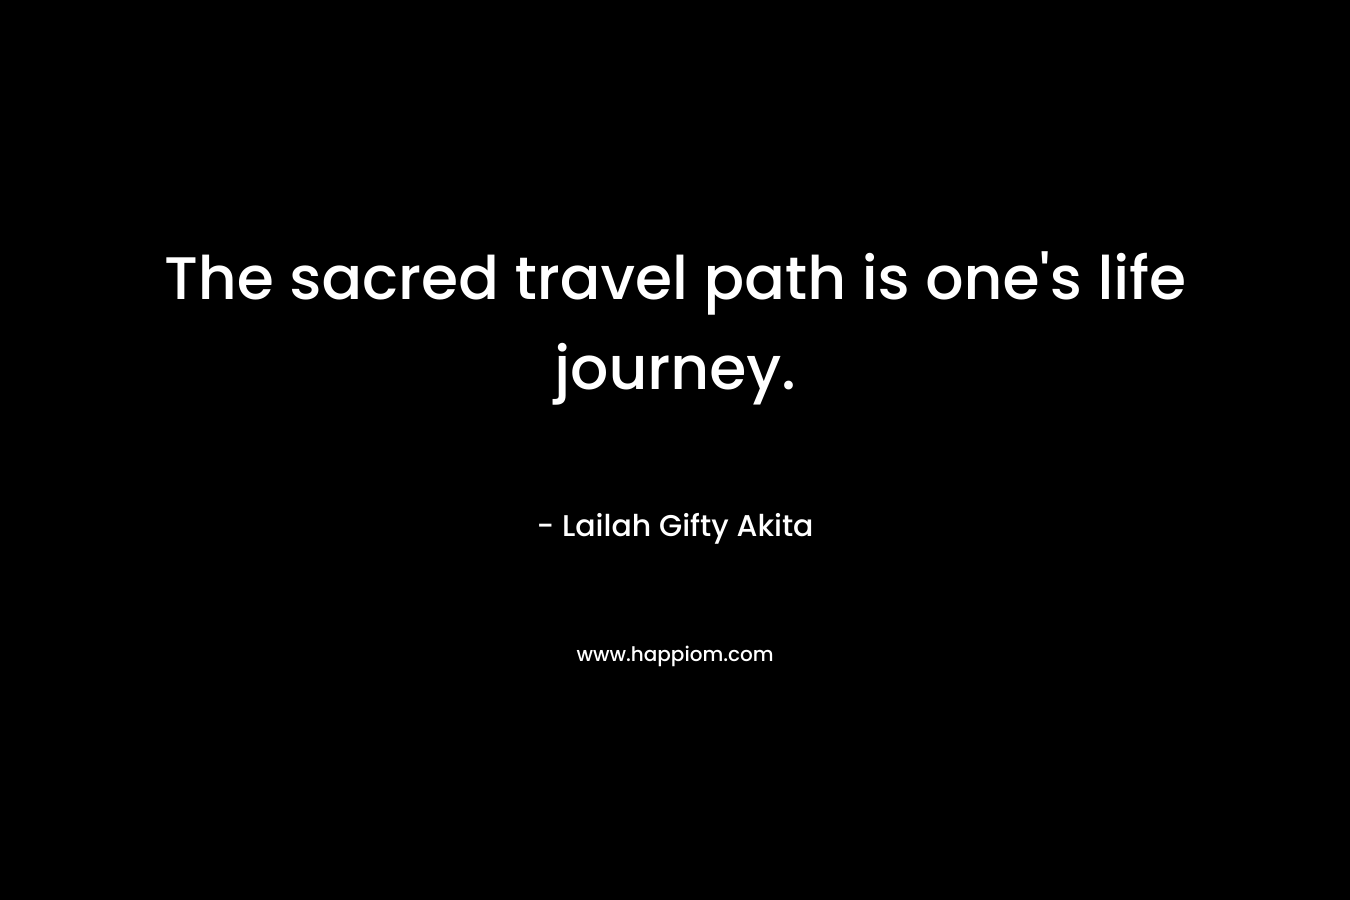 The sacred travel path is one's life journey.